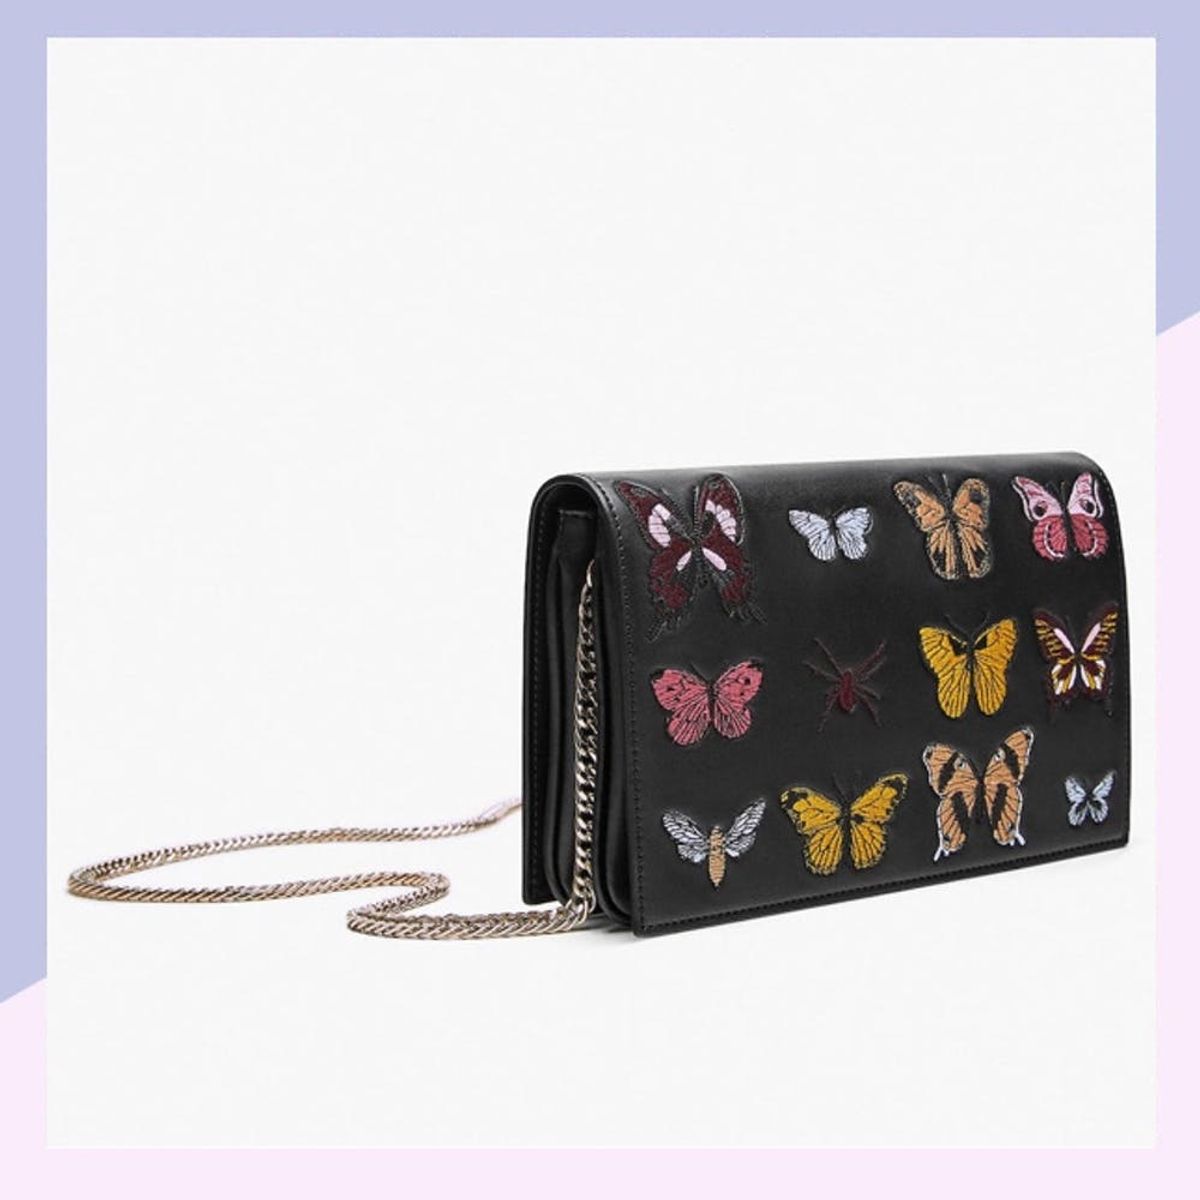 ‘90s Butterfly Prints Are Back, Baby